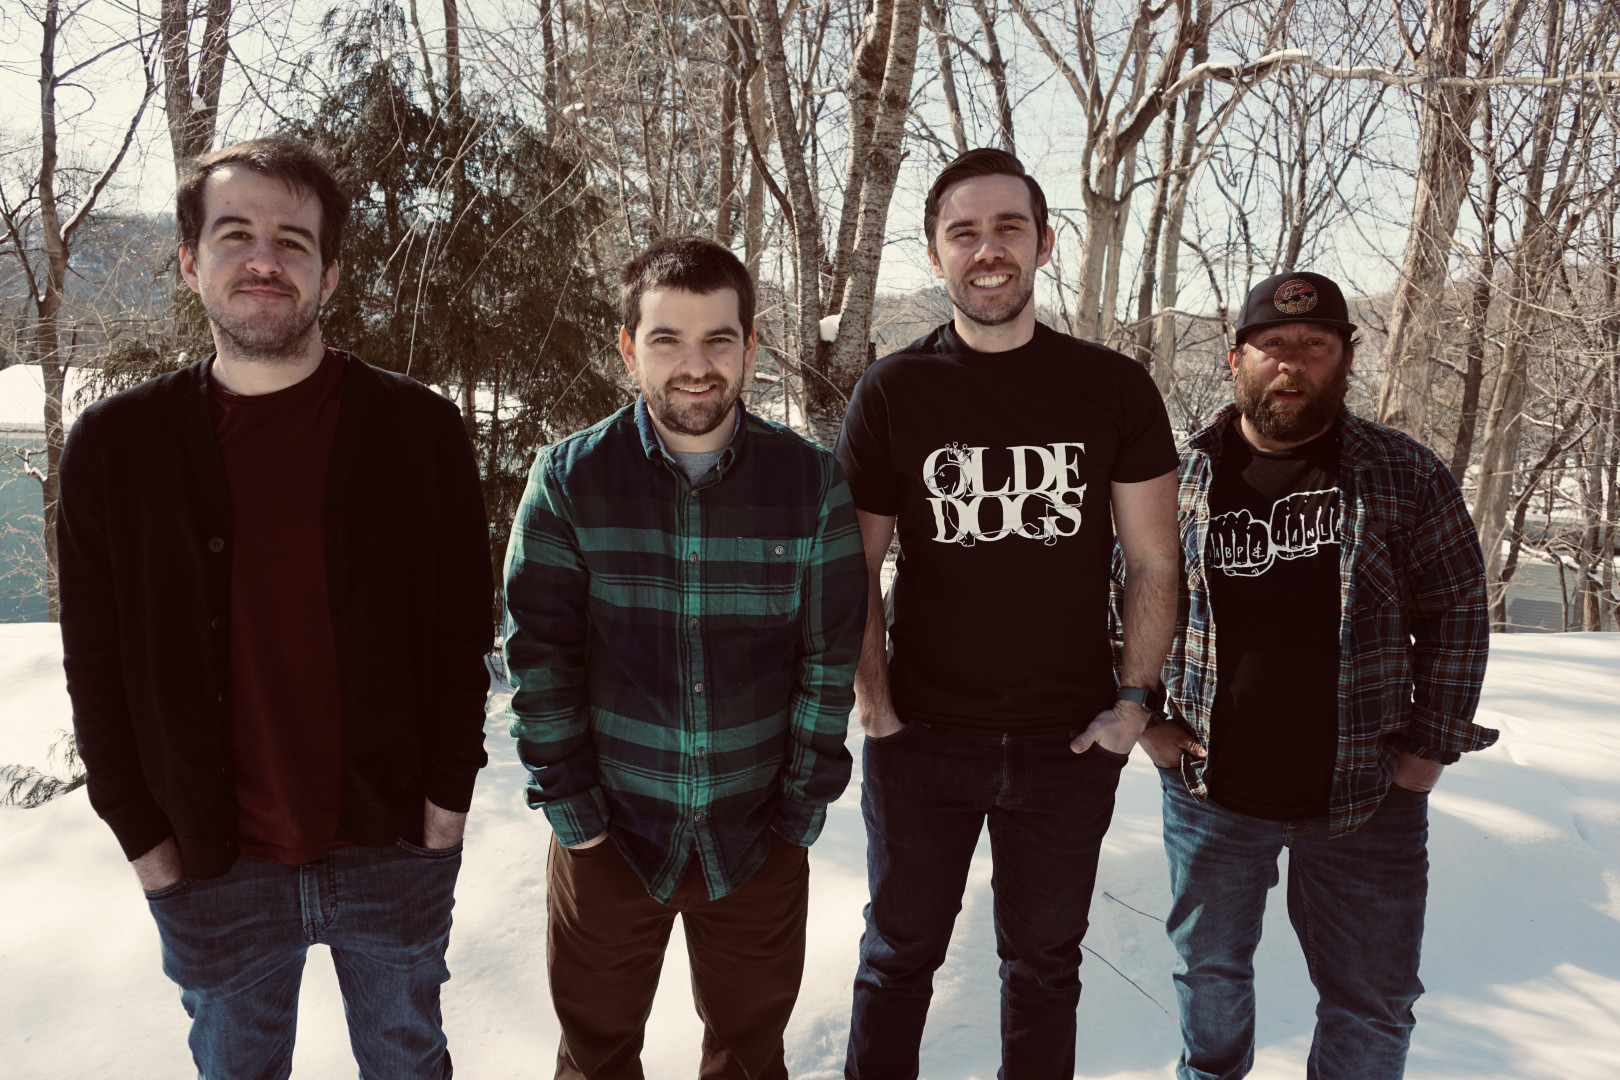 American Thrills signs to Wiretap Records